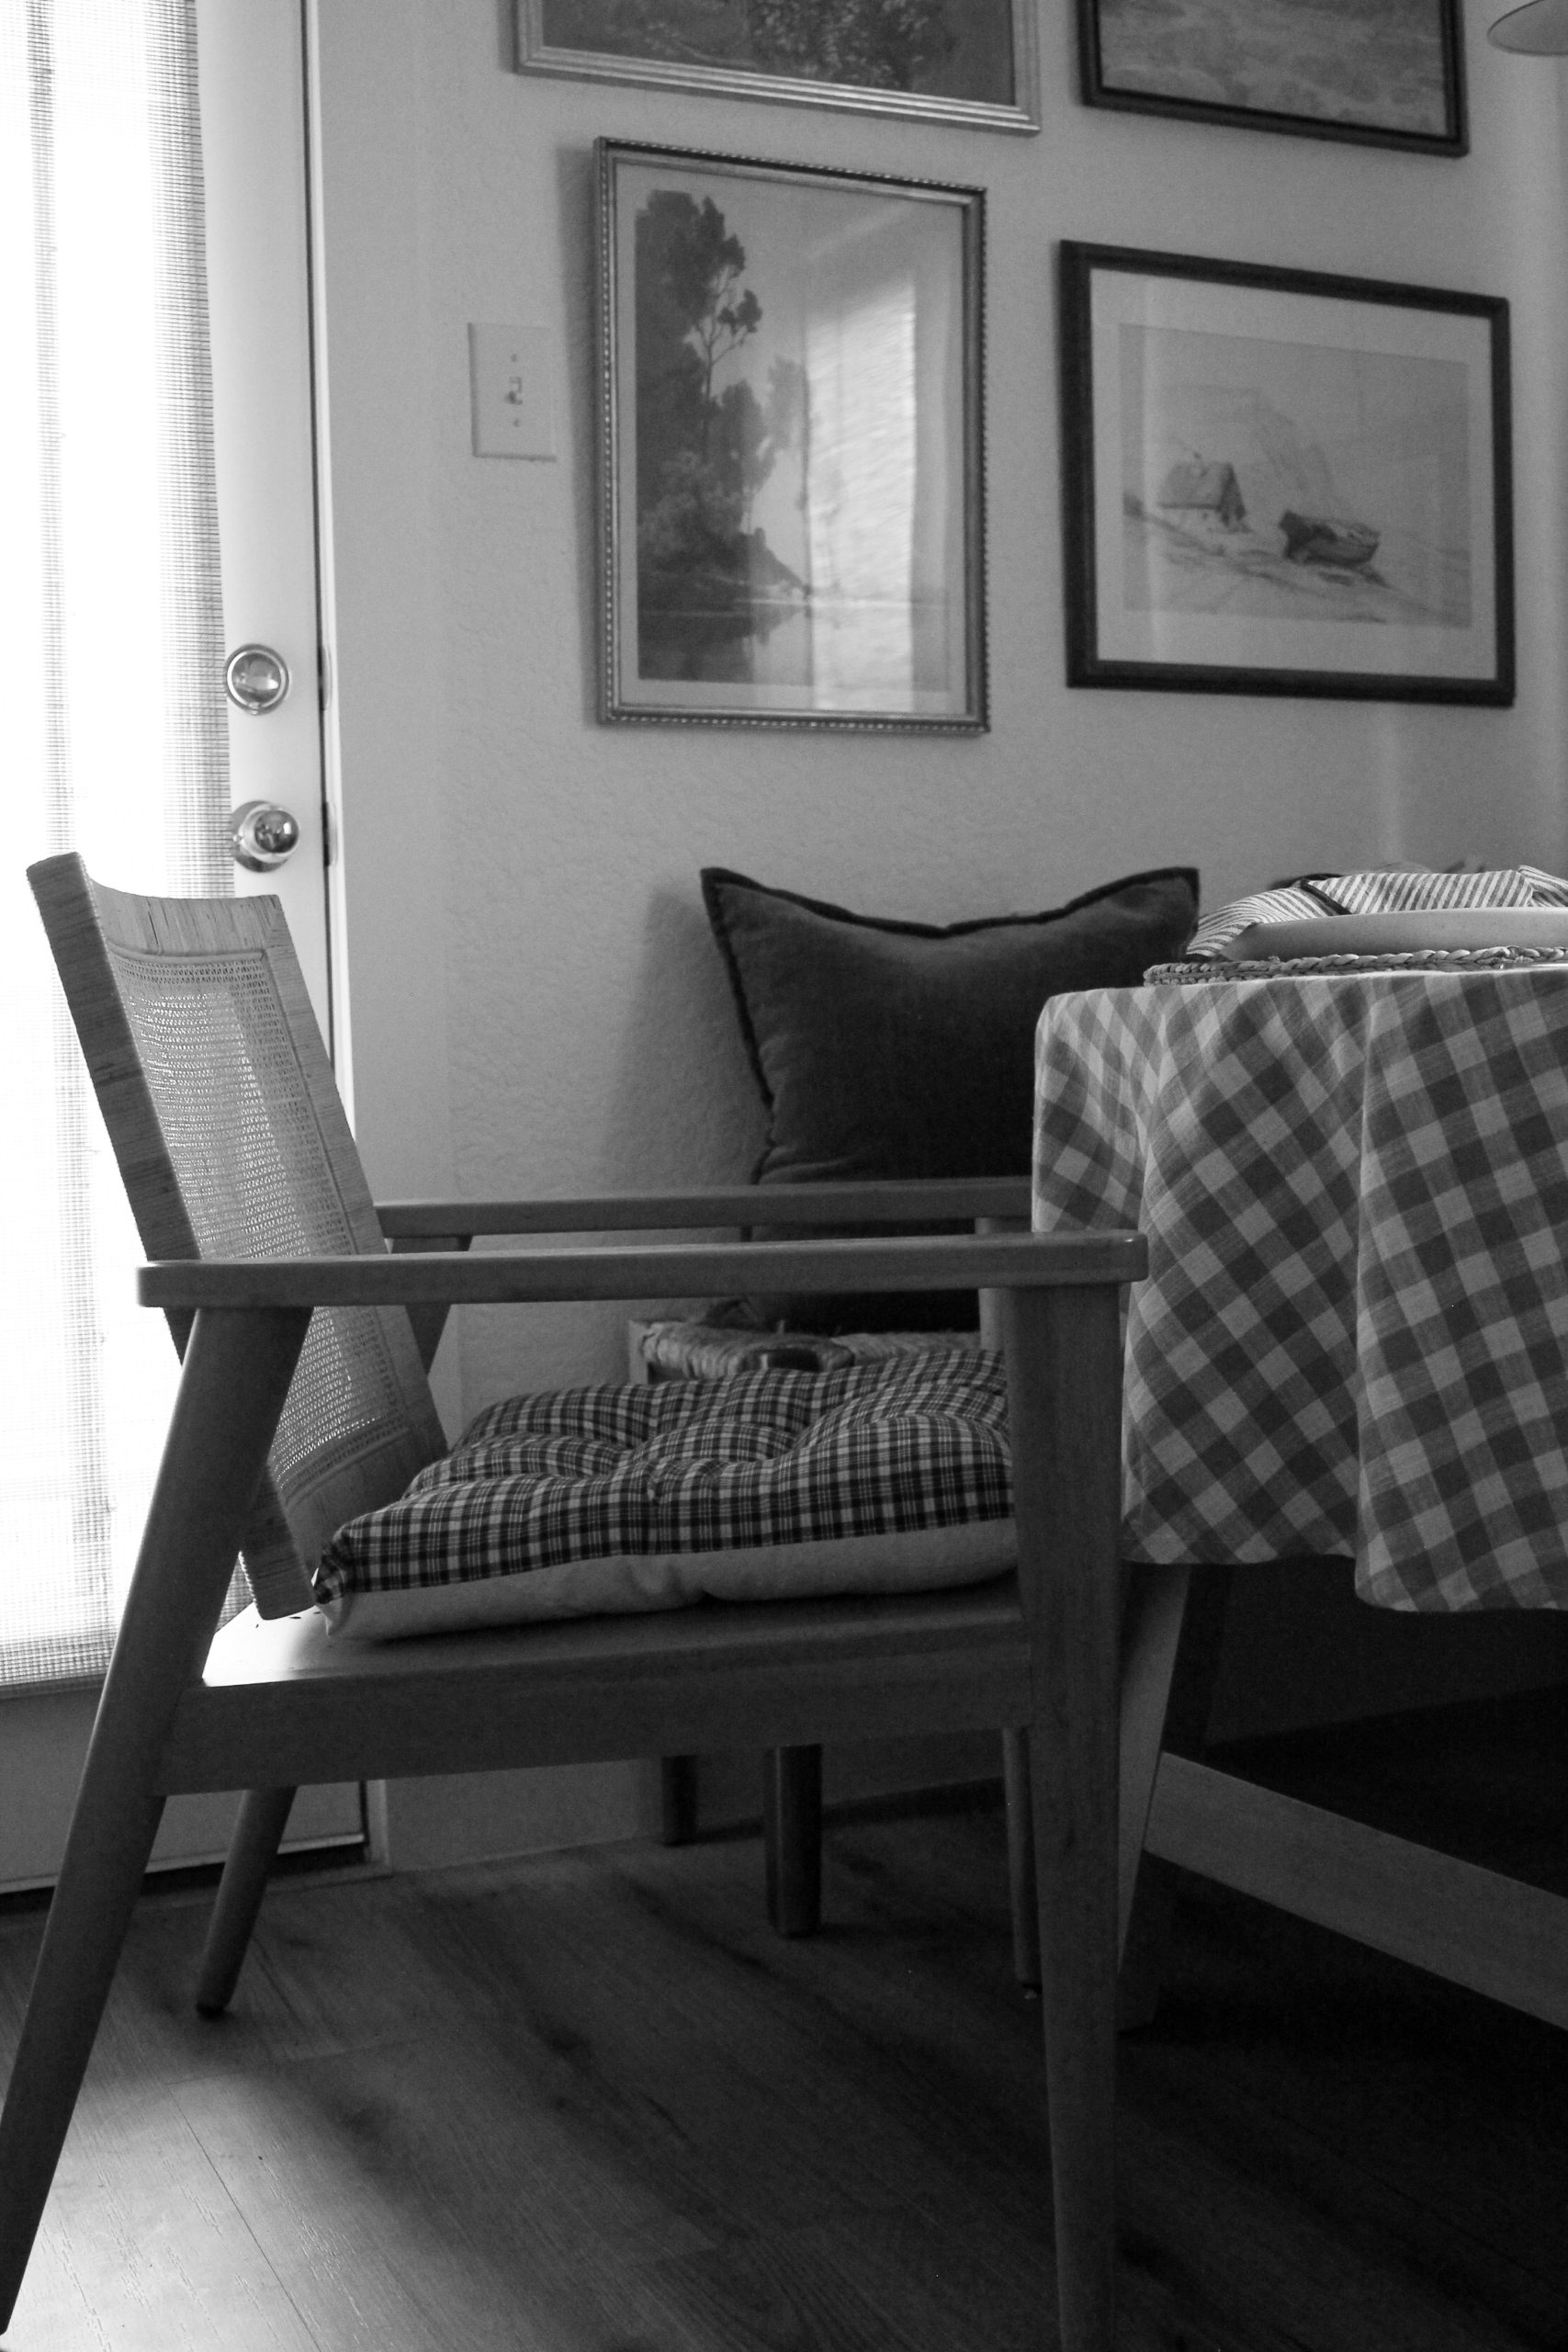 Table setting, mcm style chair with round table featuring a gingham tablecloth.